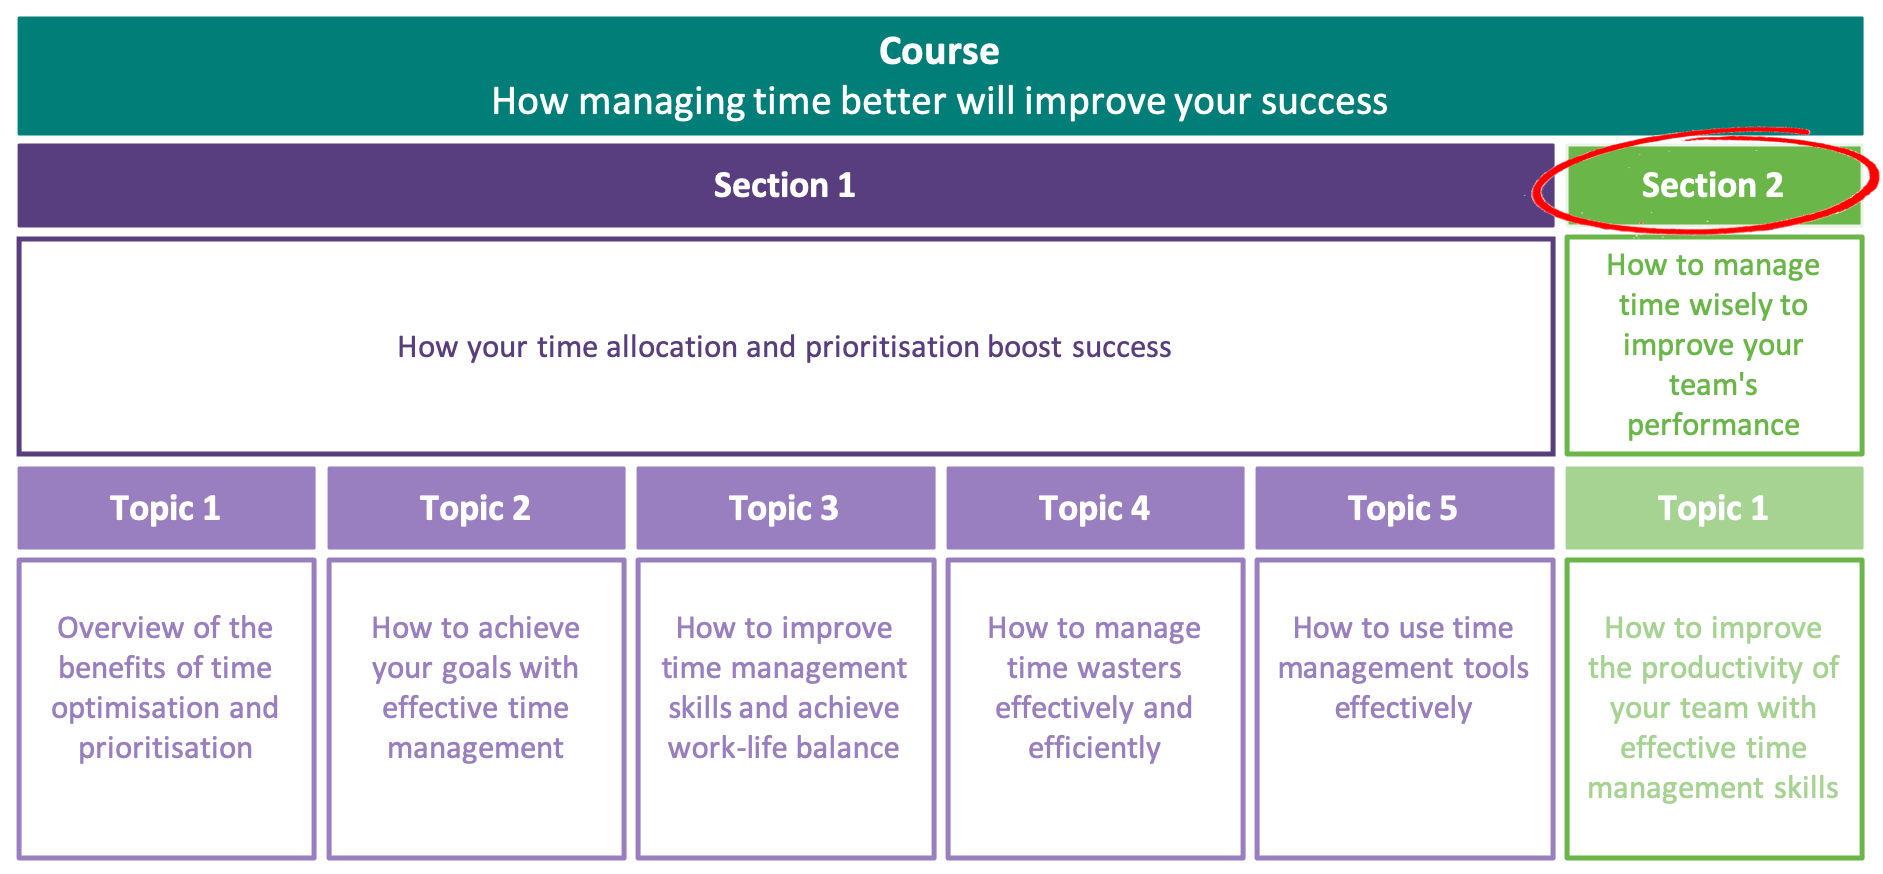 How to manage time wisely to improve your team's performance